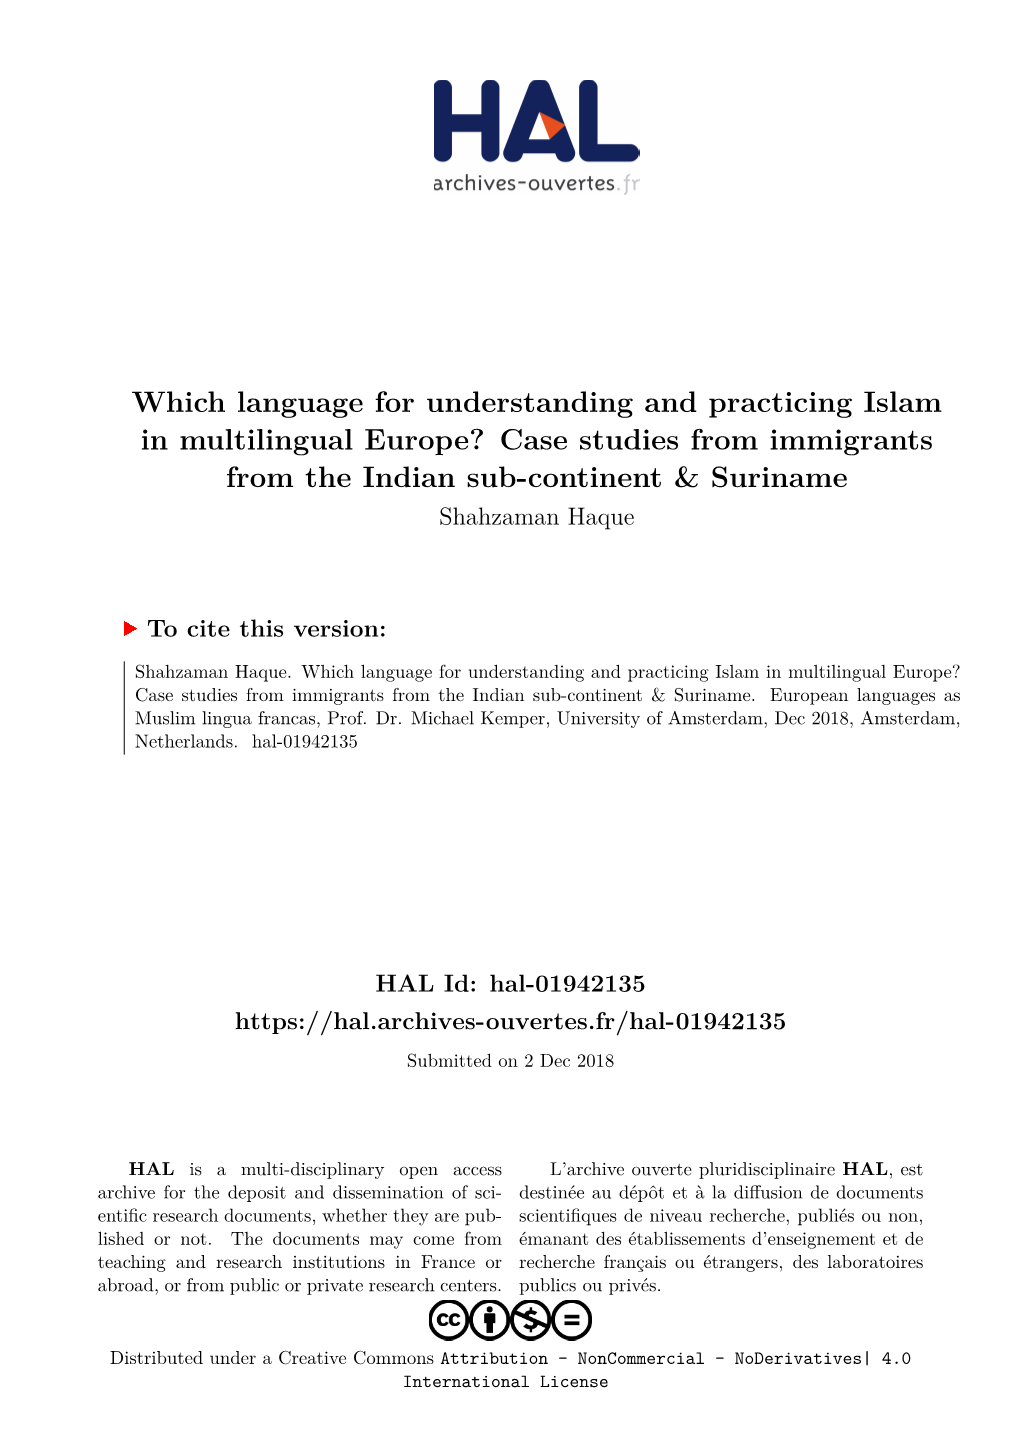 Which Language for Understanding and Practicing Islam in Multilingual Europe? Case Studies from Immigrants from the Indian Sub-Continent & Suriname Shahzaman Haque